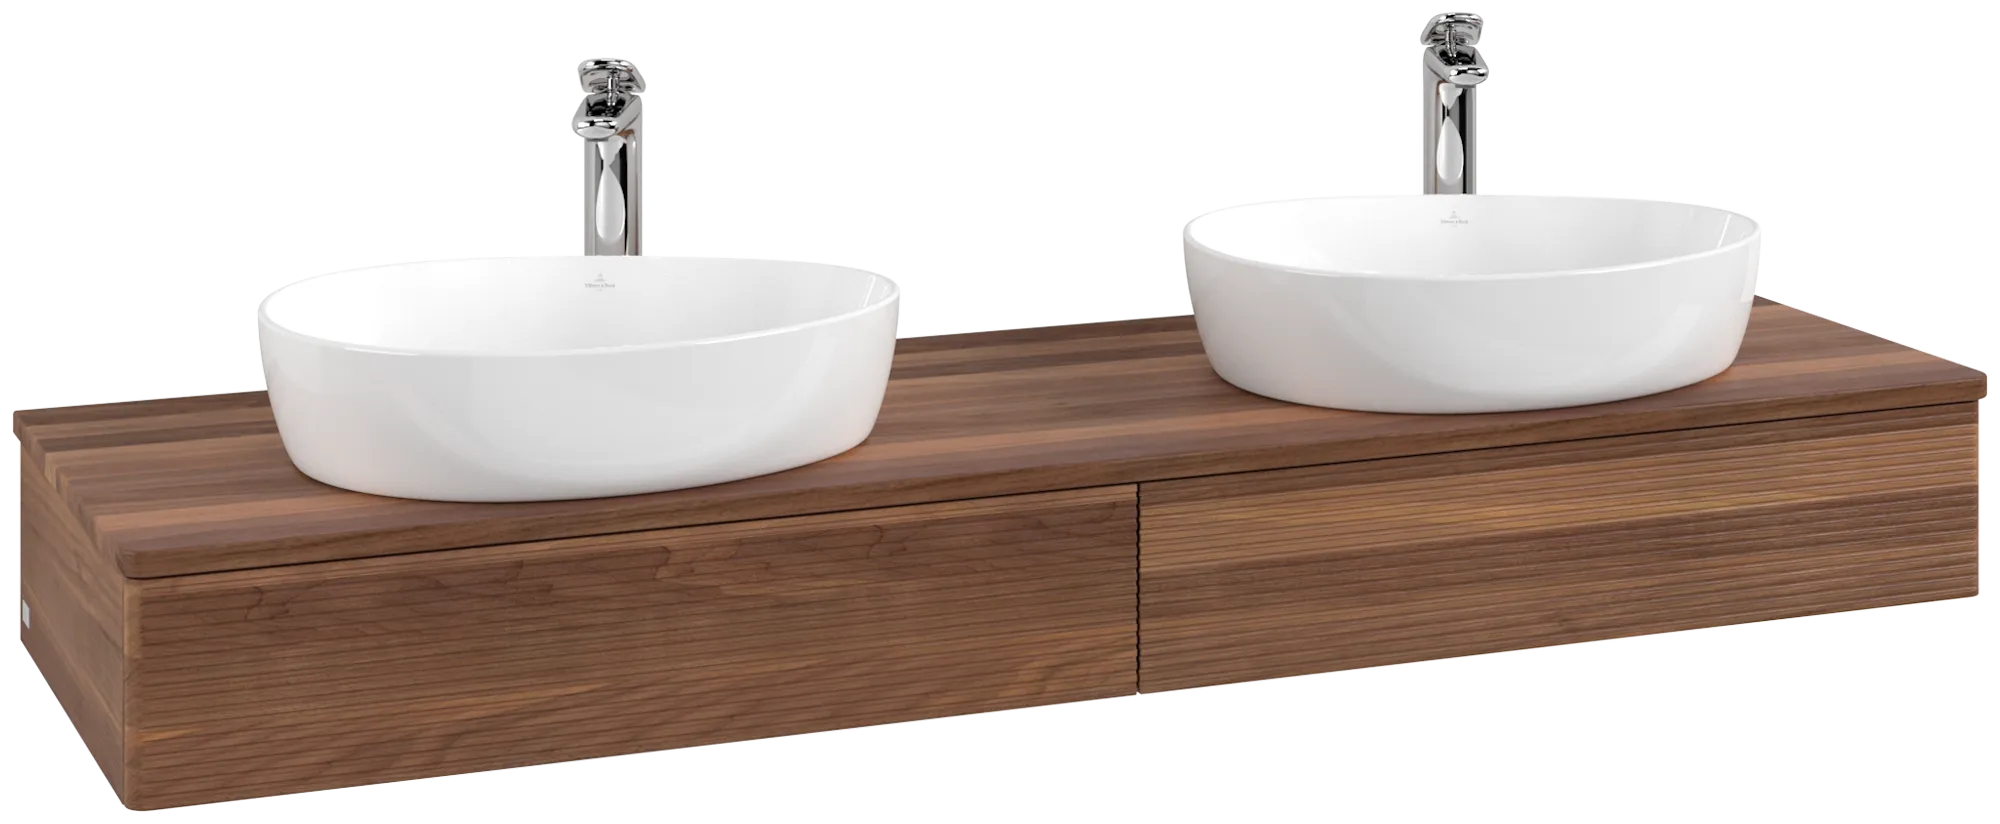 VILLEROY BOCH Antao Vanity unit, 2 pull-out compartments, 1600 x 190 x 500 mm, Front with grain texture, Warm Walnut / Warm Walnut #K17152HM resmi